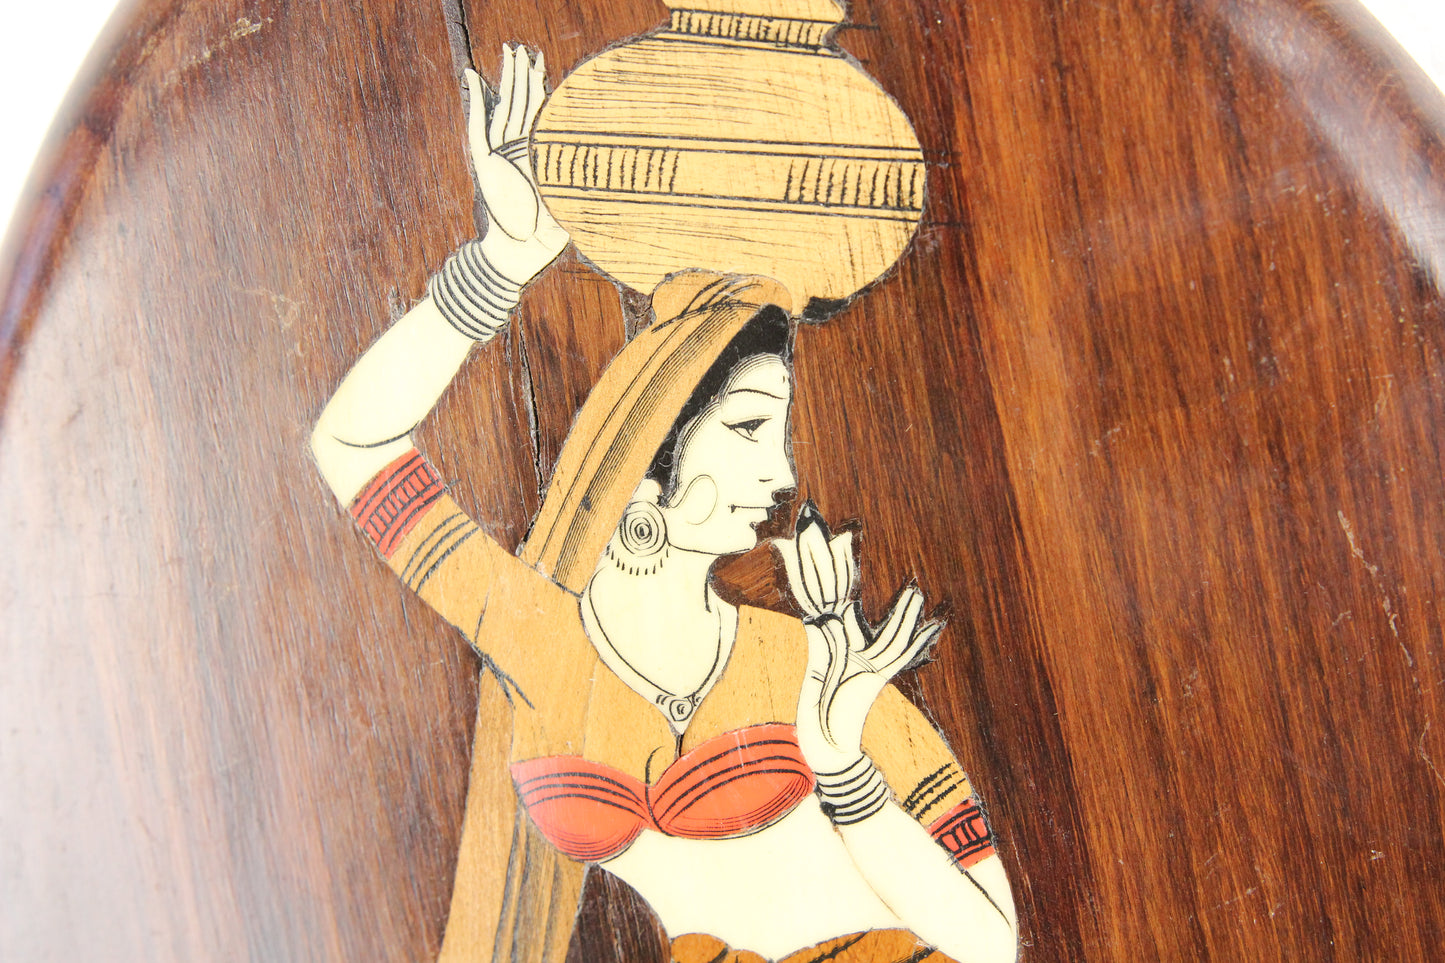 Inlaid Wooden Plaque of a Beautiful Woman Holding a Vessel on Her Head